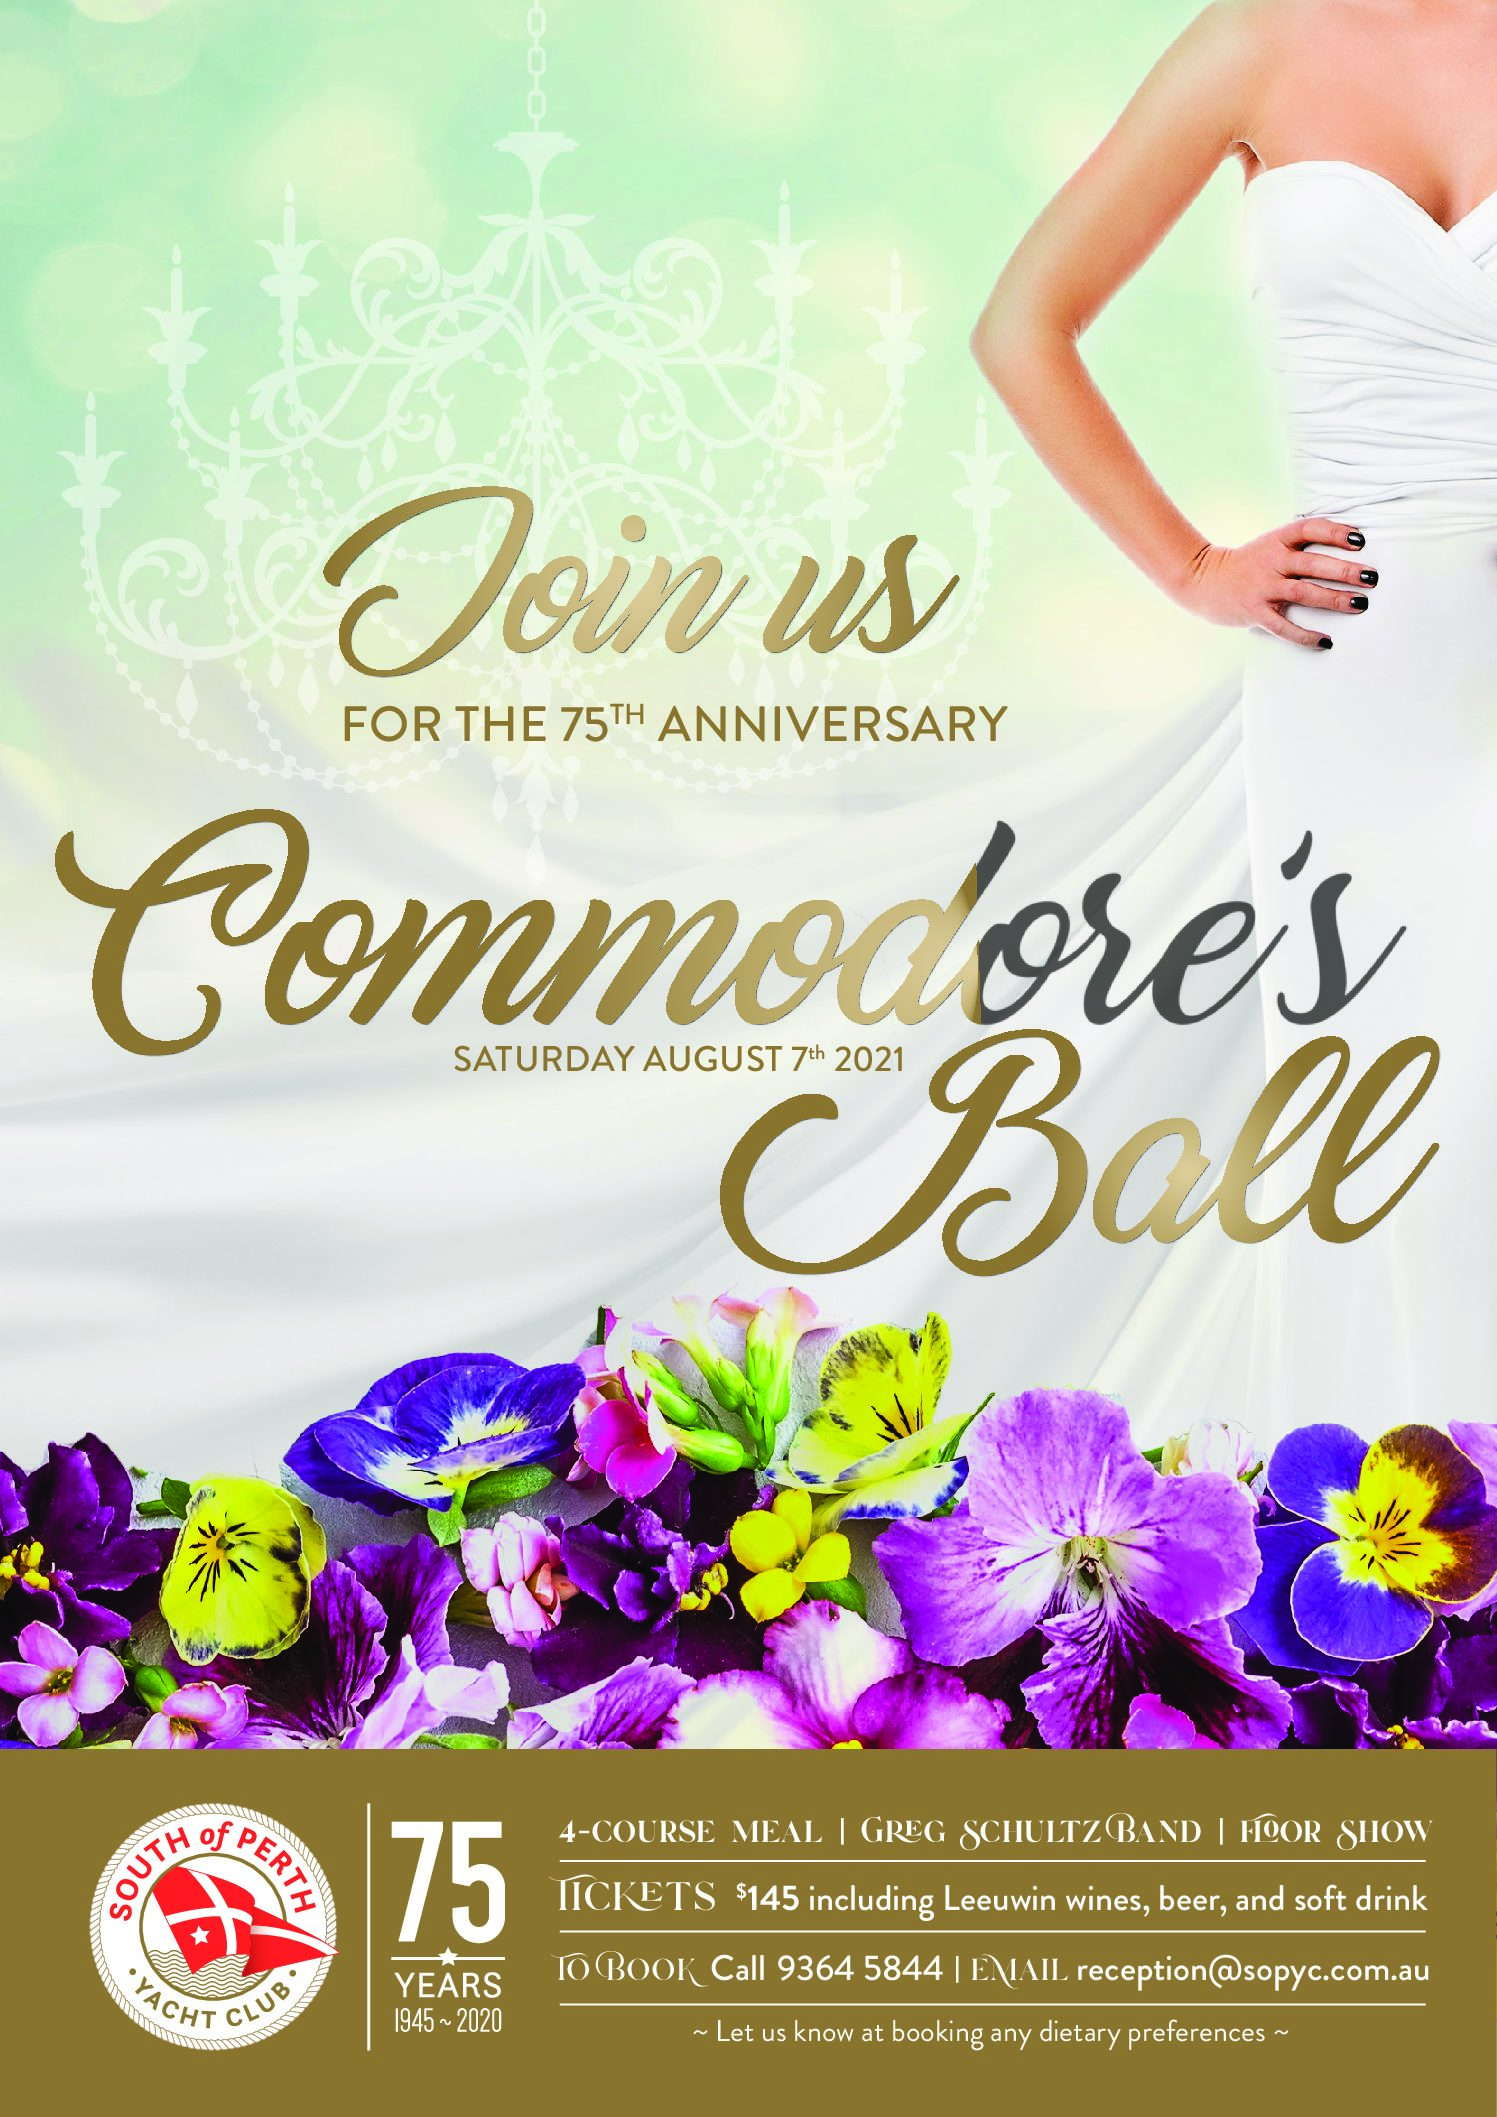 Commodore's Ball - Book now!